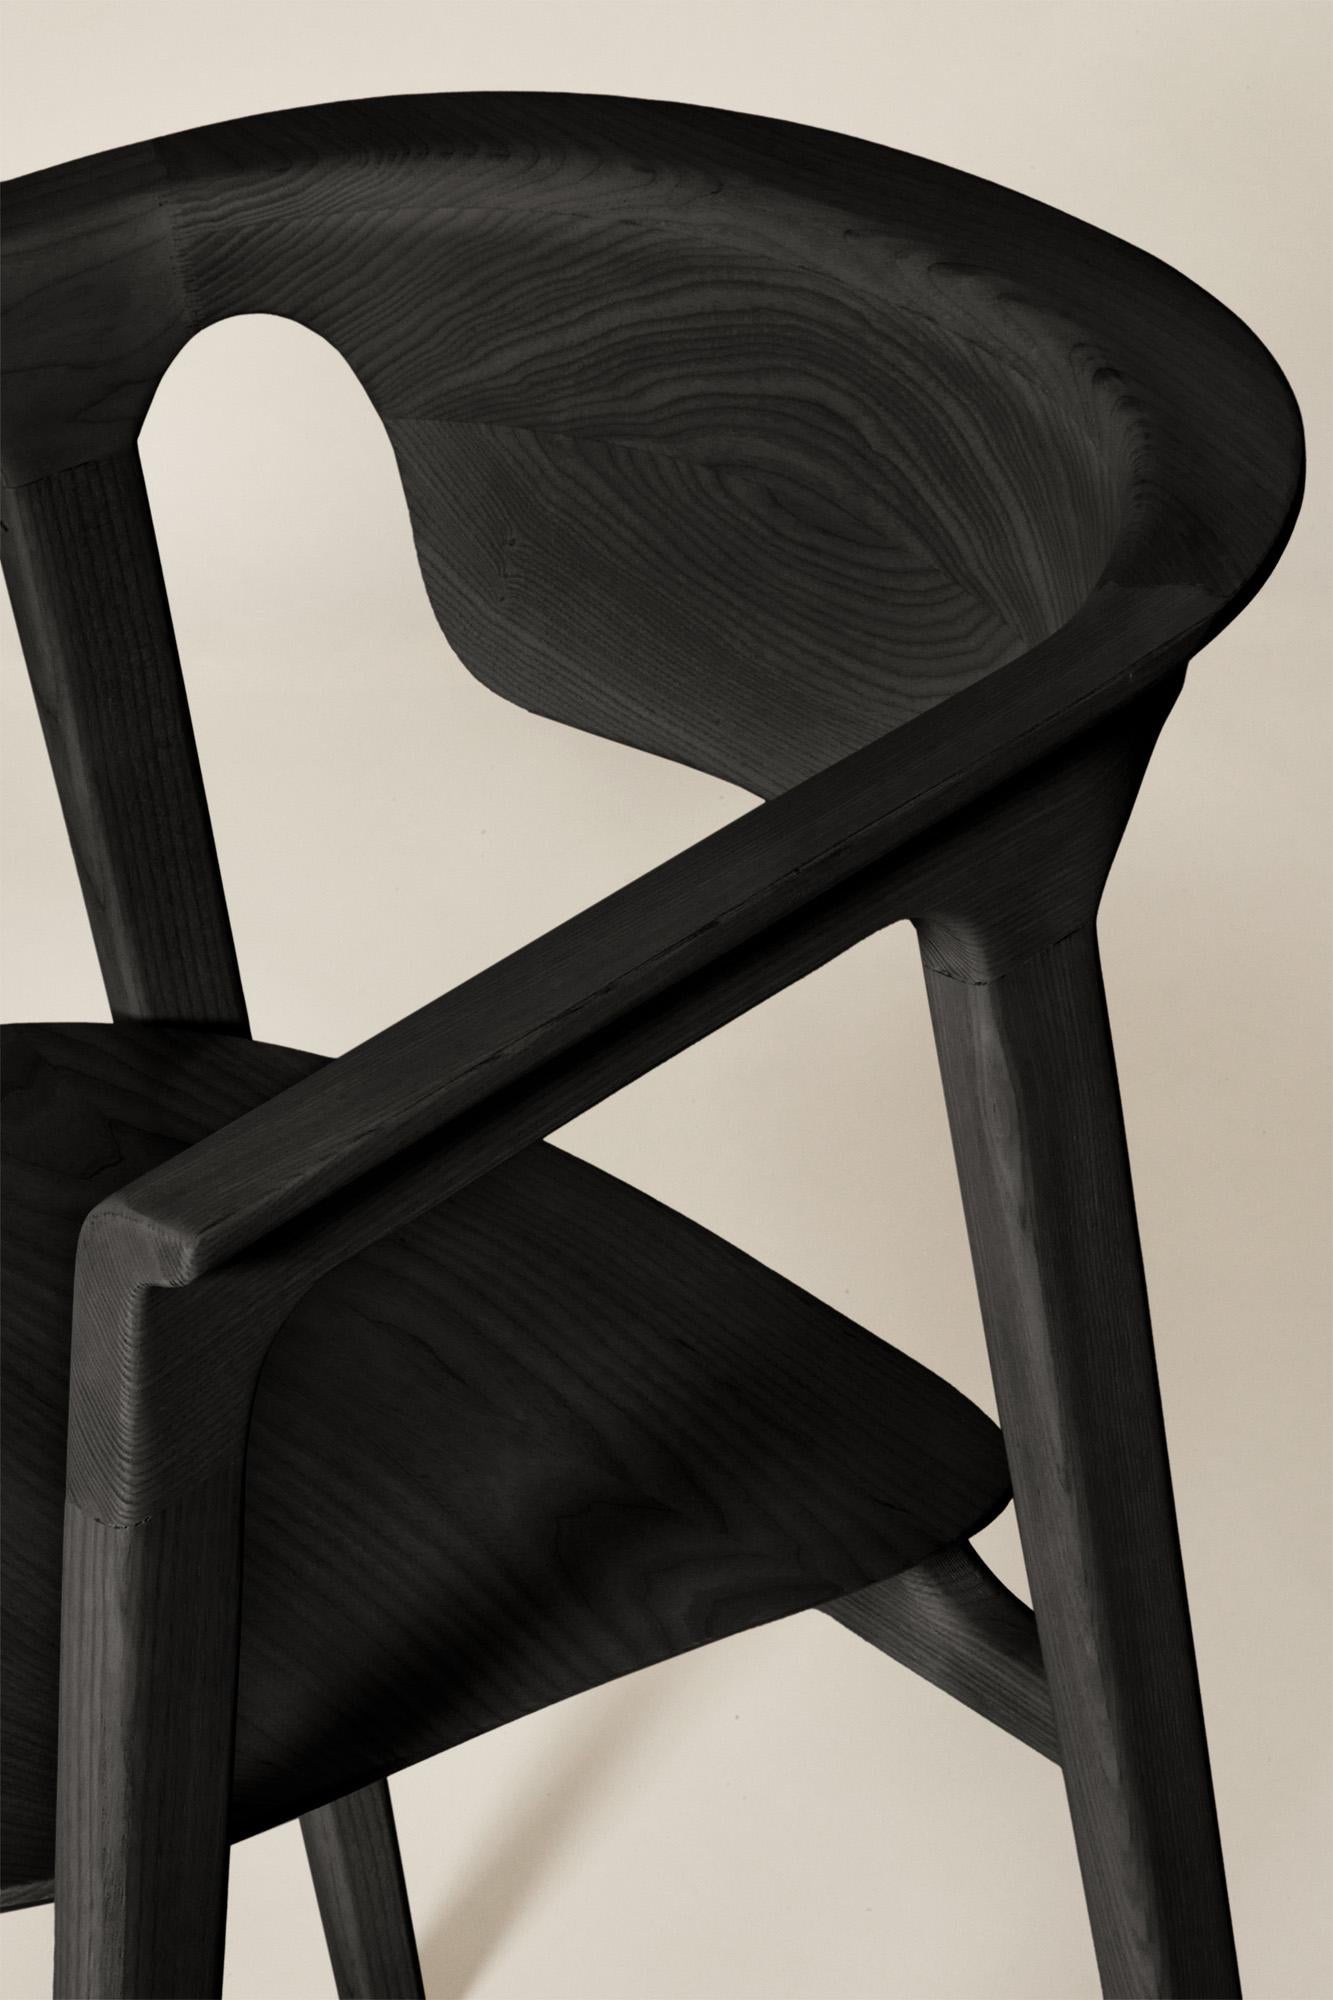 Duna Solid Wood Chair, Ash in Handmade Black Finish, Contemporary In New Condition For Sale In Cadeglioppi de Oppeano, VR